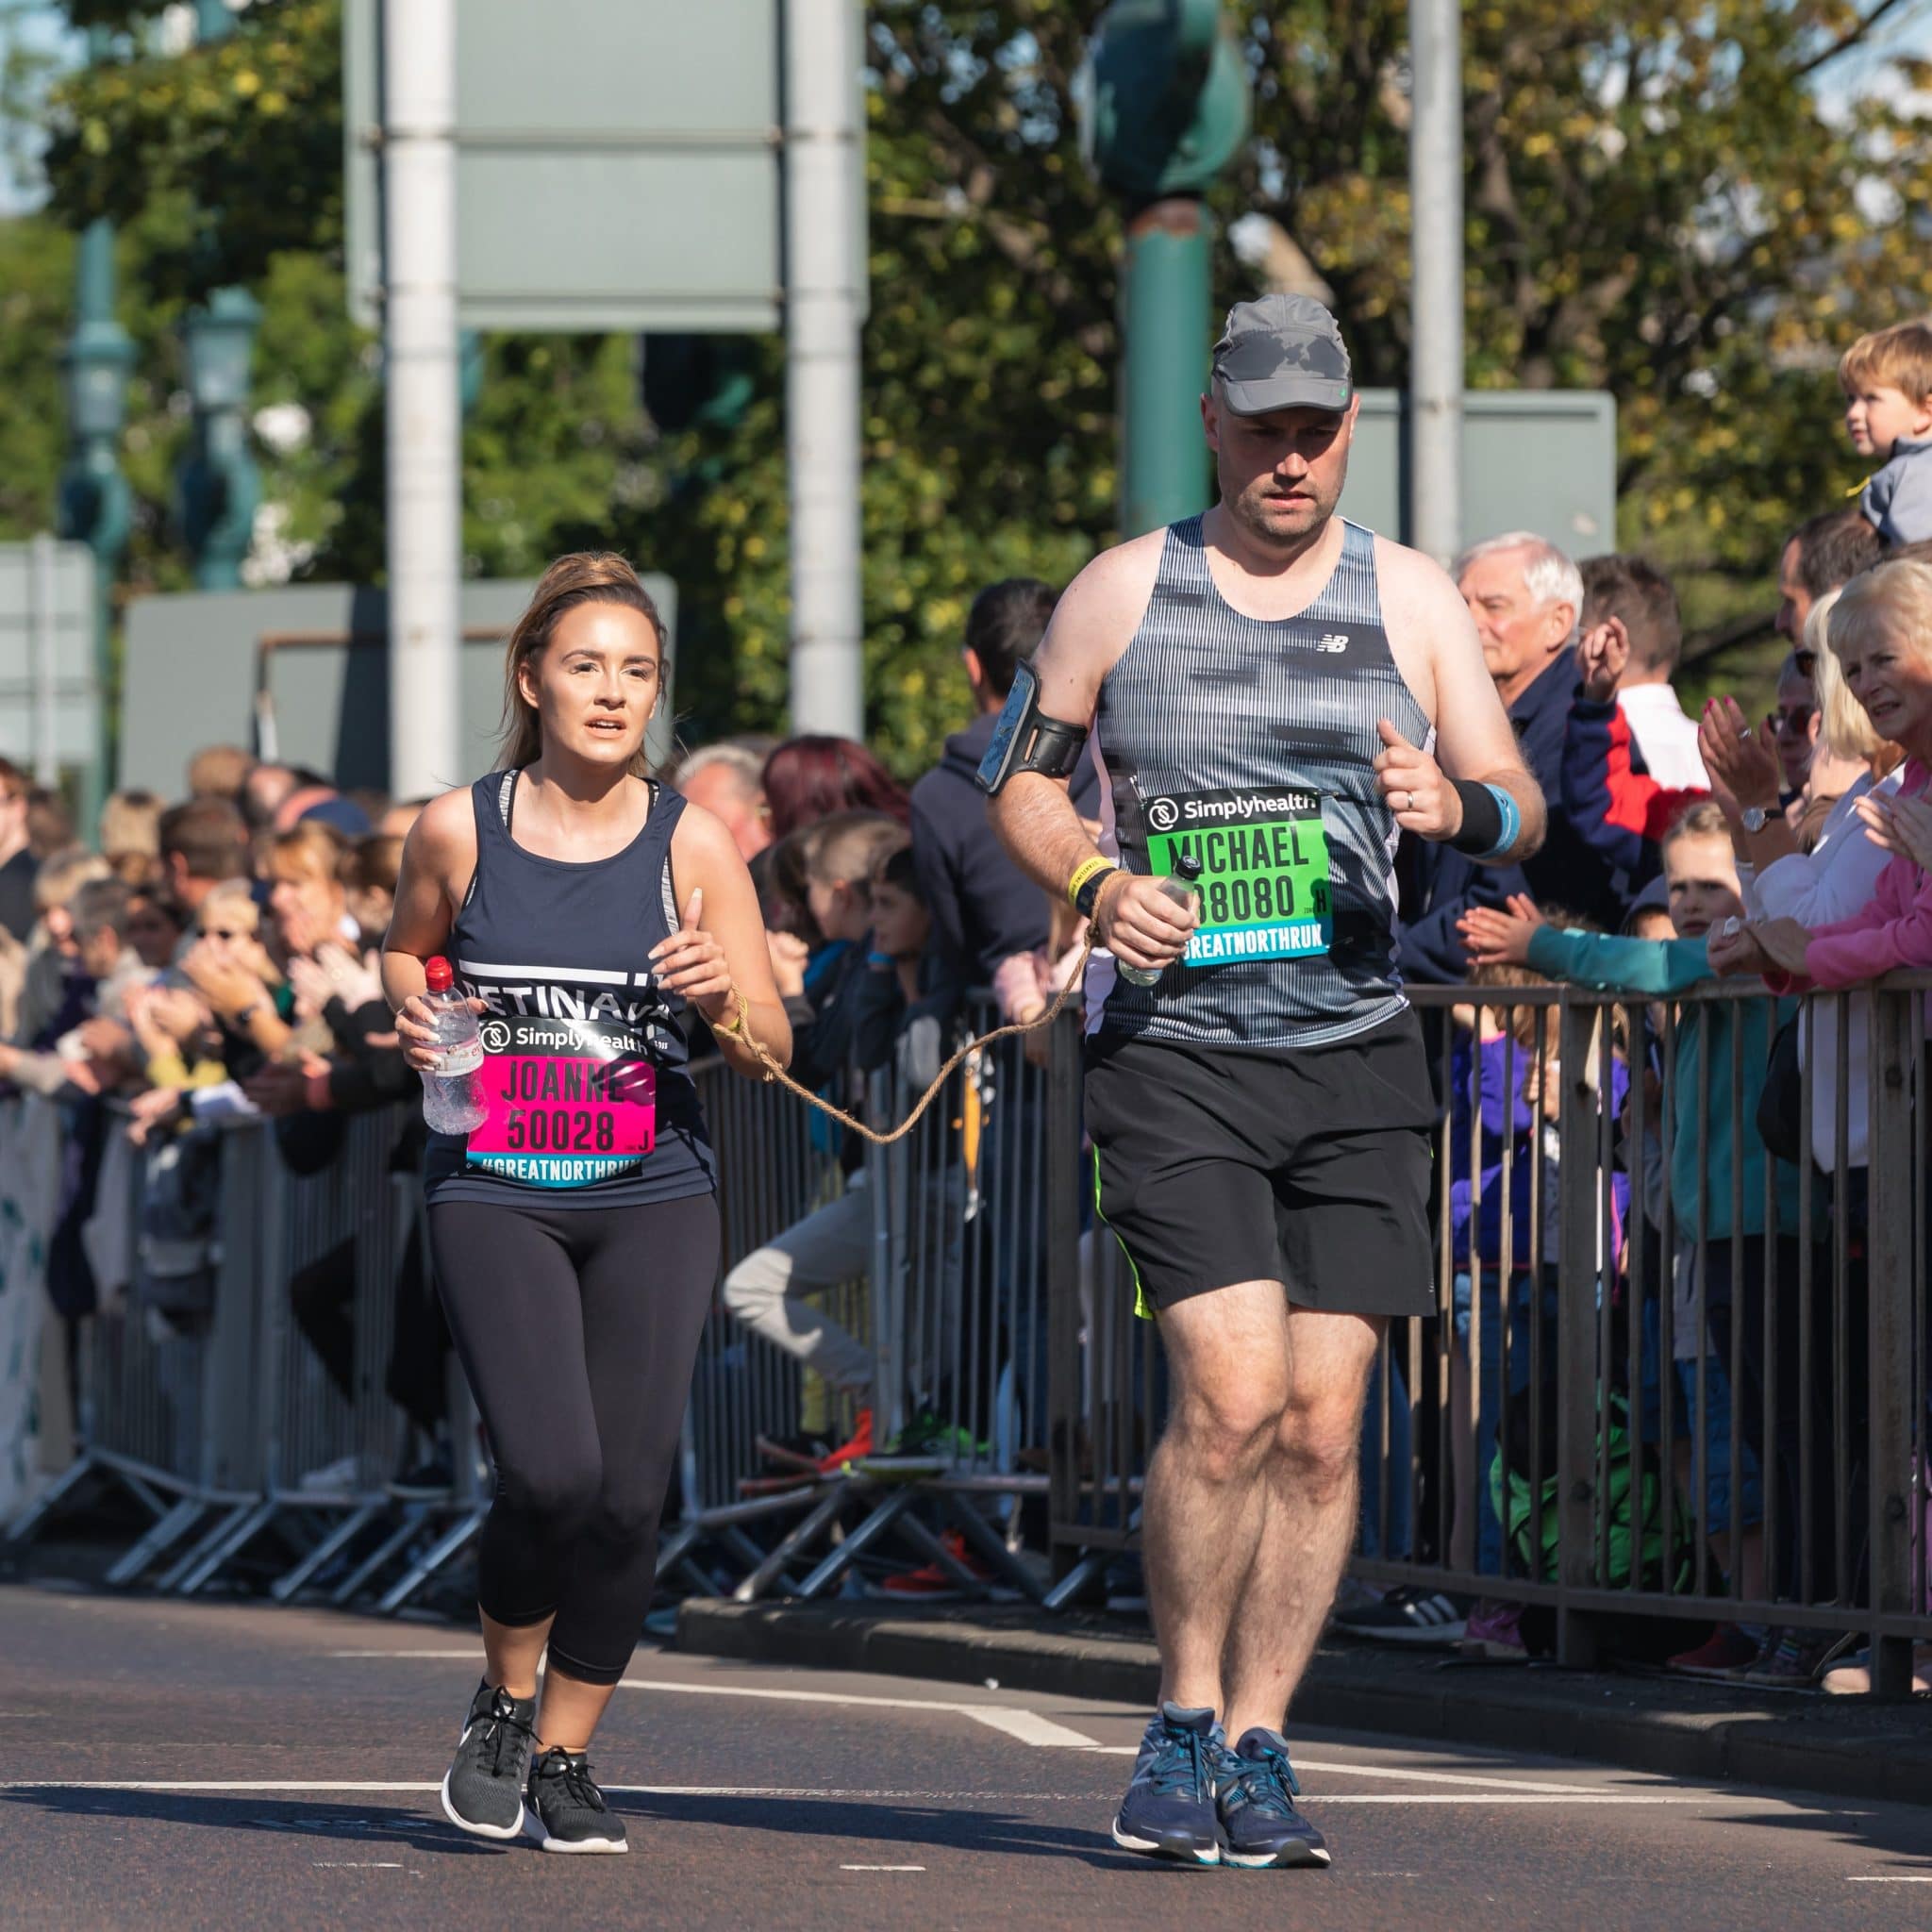 Image shows a runner in a blue Retina UK running vest with her guide runner to the right. Crowds line the road as they run by.